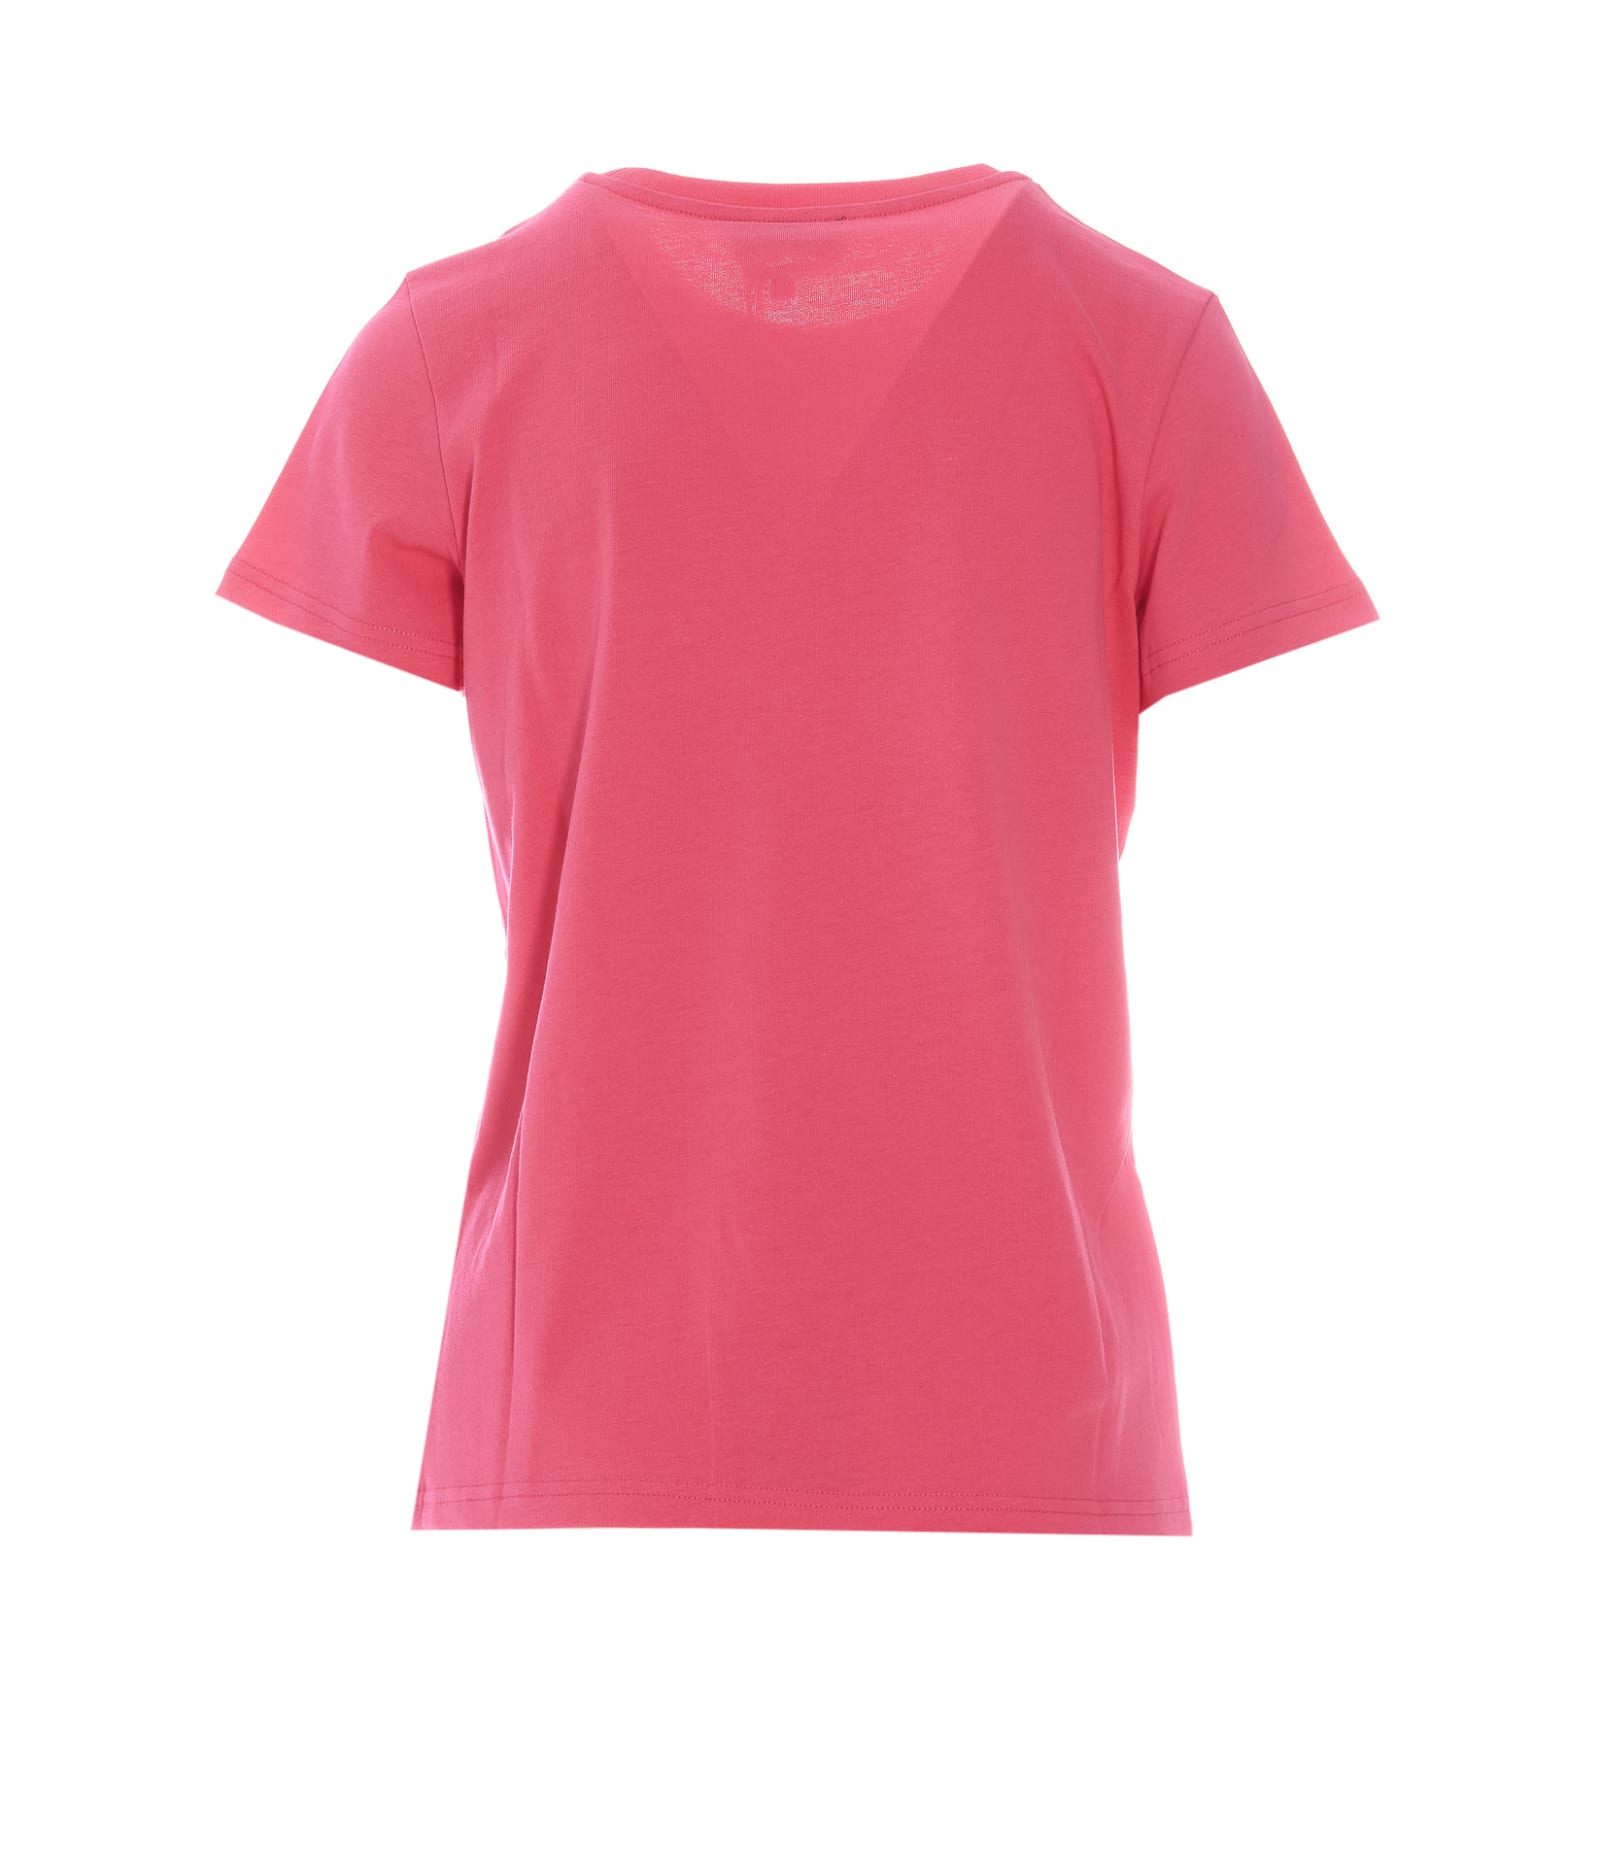 Shop Apc Denise T-shirt In Pink